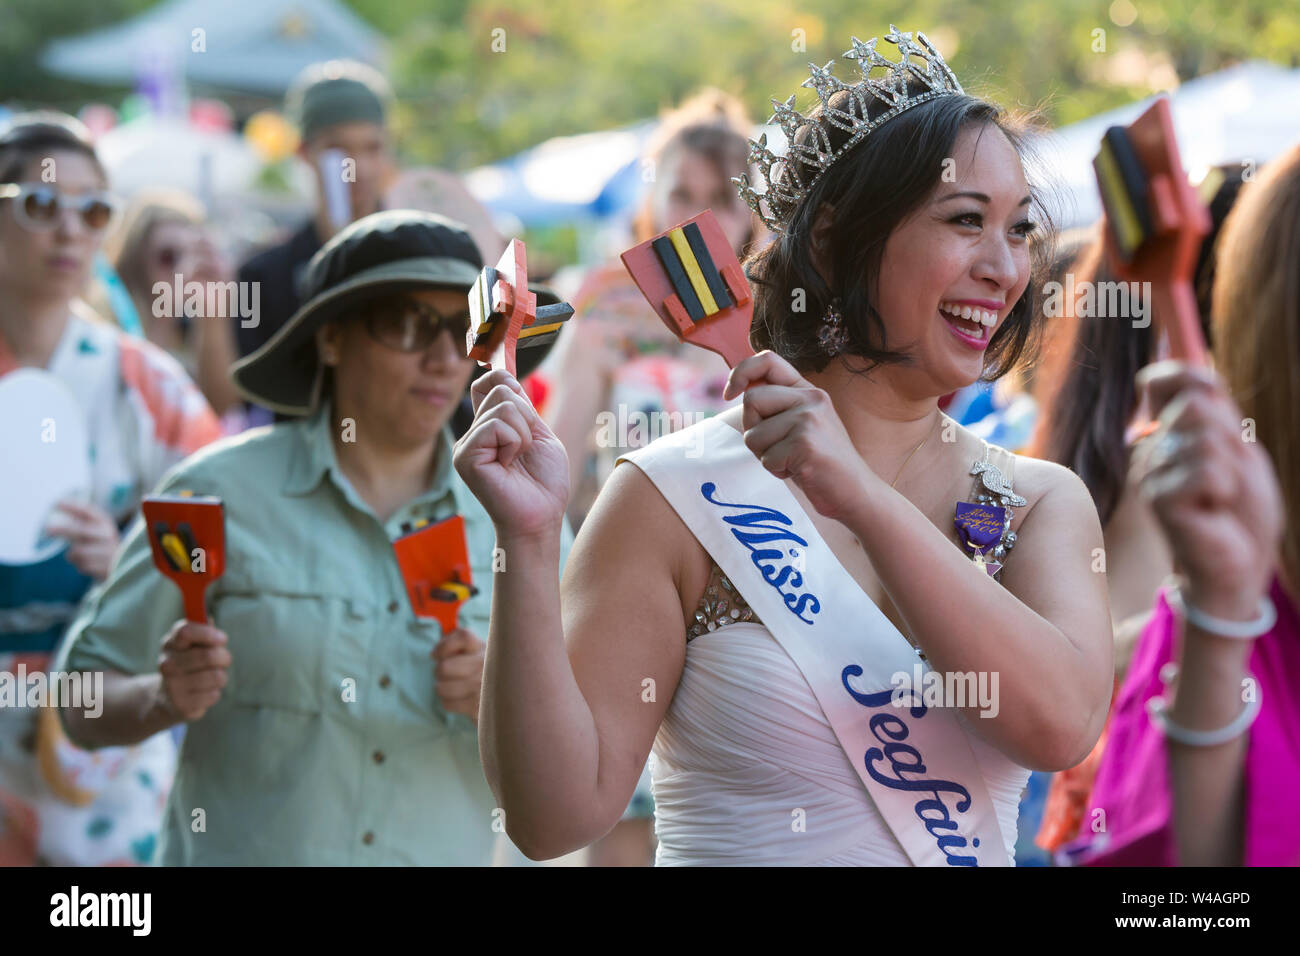 Caroline Pham, former Miss Seafair 2000, performs a Bon dance with kachi-kachi at the 87th annual Bon Odori Festival in Seattle, Washington on July 20, 2019. The lively summer festival features traditional music and folk dance to welcome the spirits of the dead and celebrate the lives of ancestors. Stock Photo